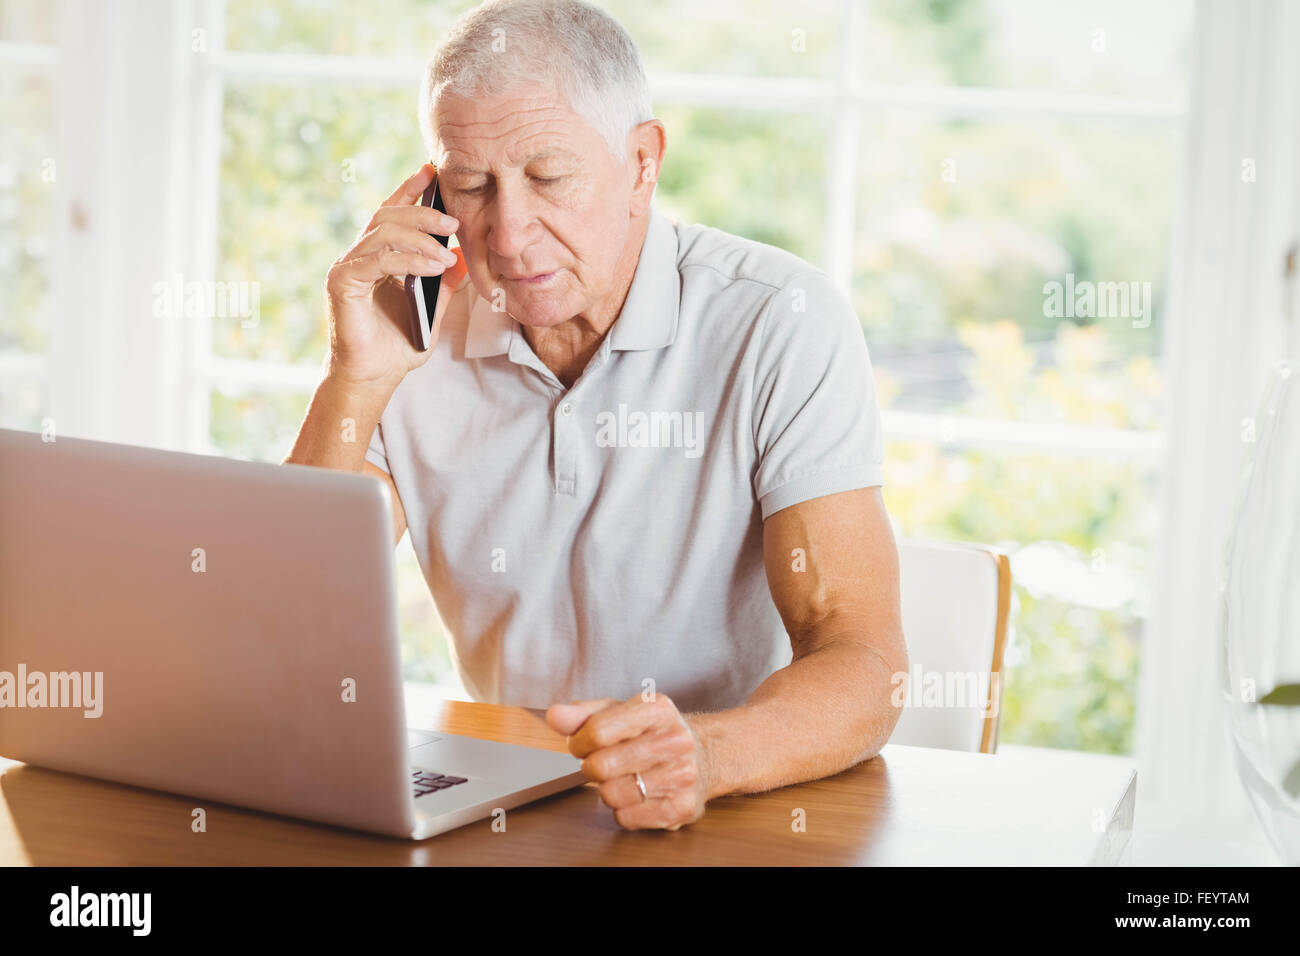 Concentrated senior man looking at laptop and phone calling Stock Photo